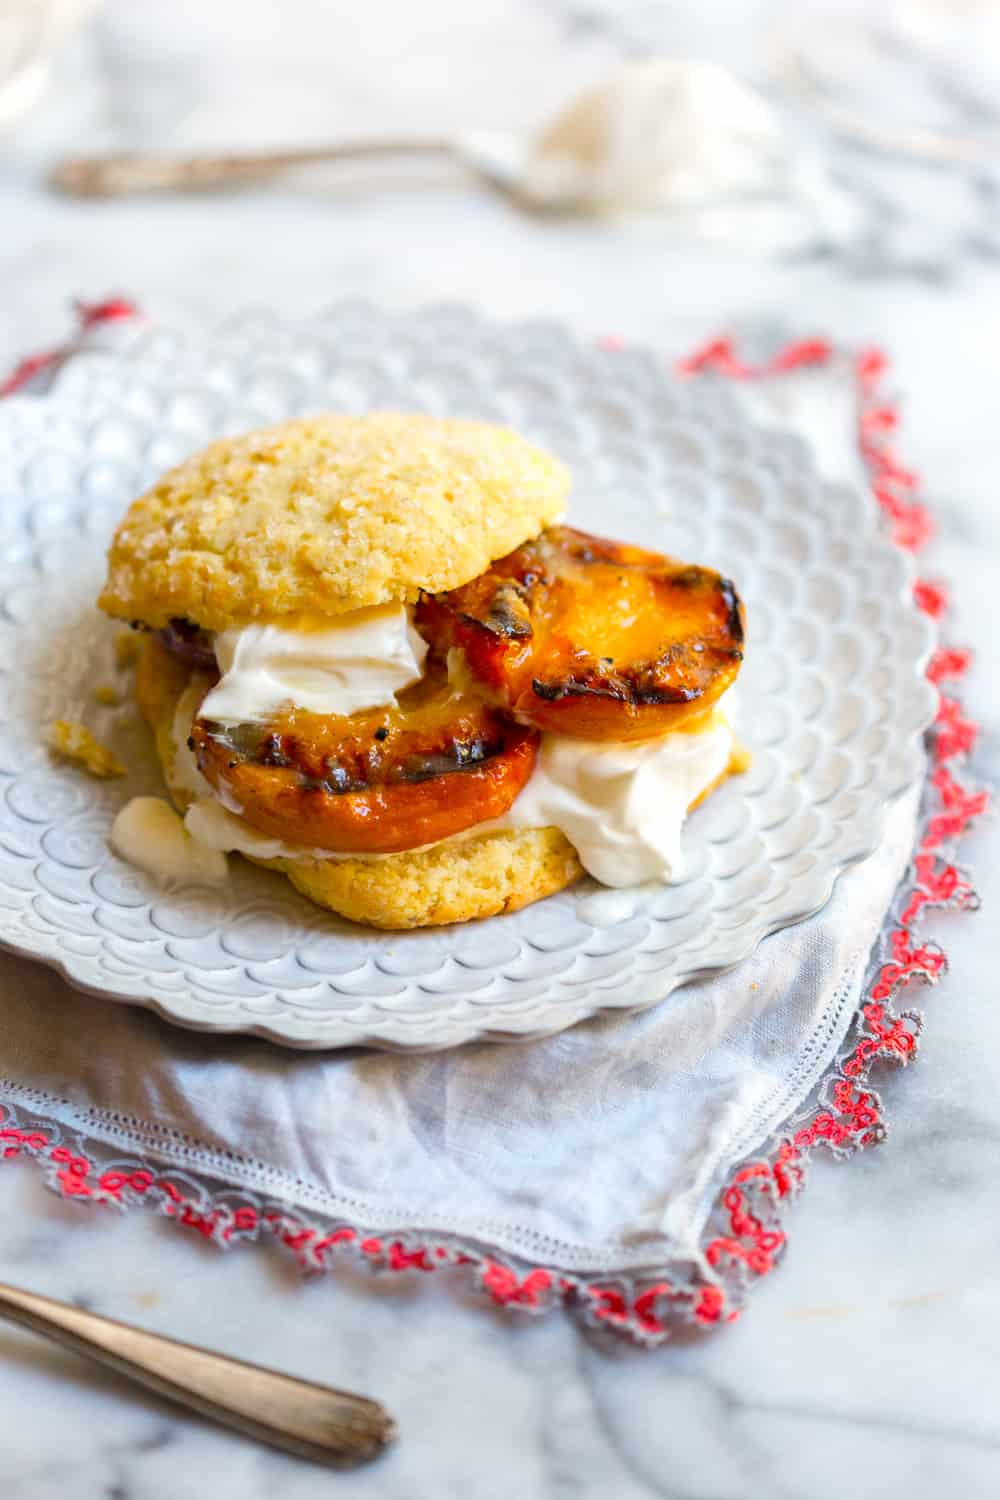 Grilled-Nectarines-Shortcakes-baking the goods